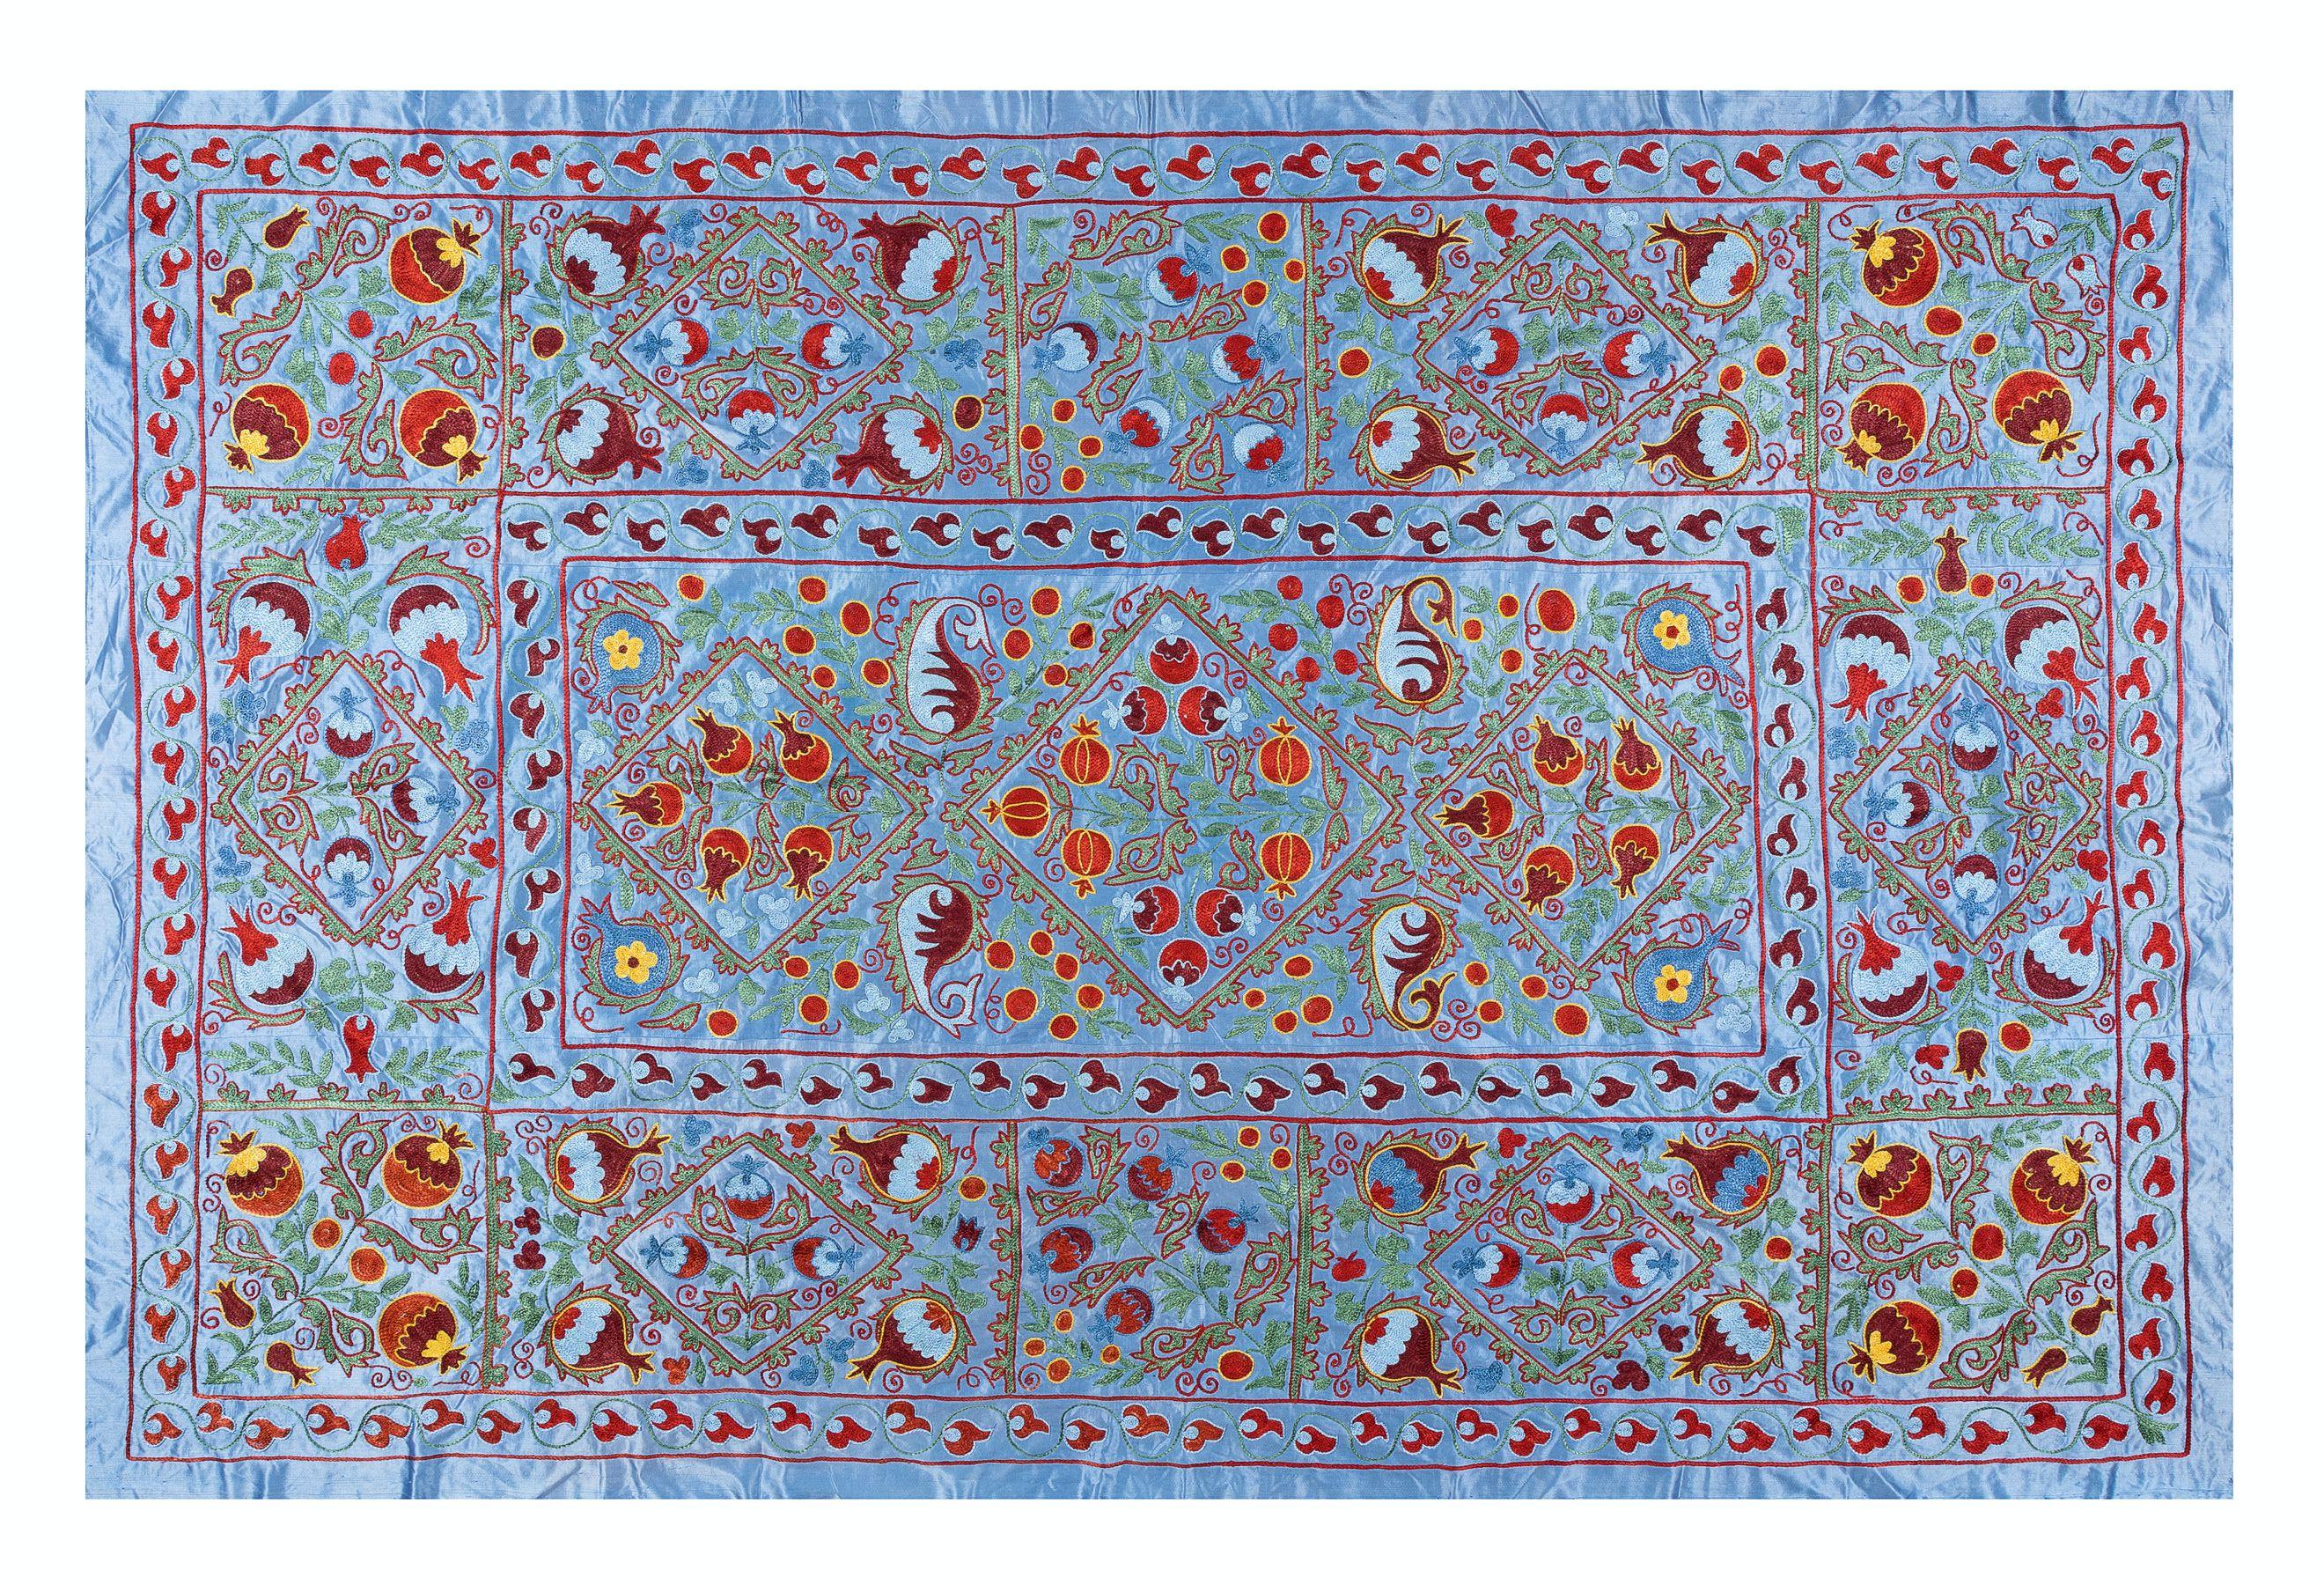 Cotton 5x7 Ft 100% Silk Suzani Bed Cover, Vintage Uzbek Hand Embroidered Wall Hanging